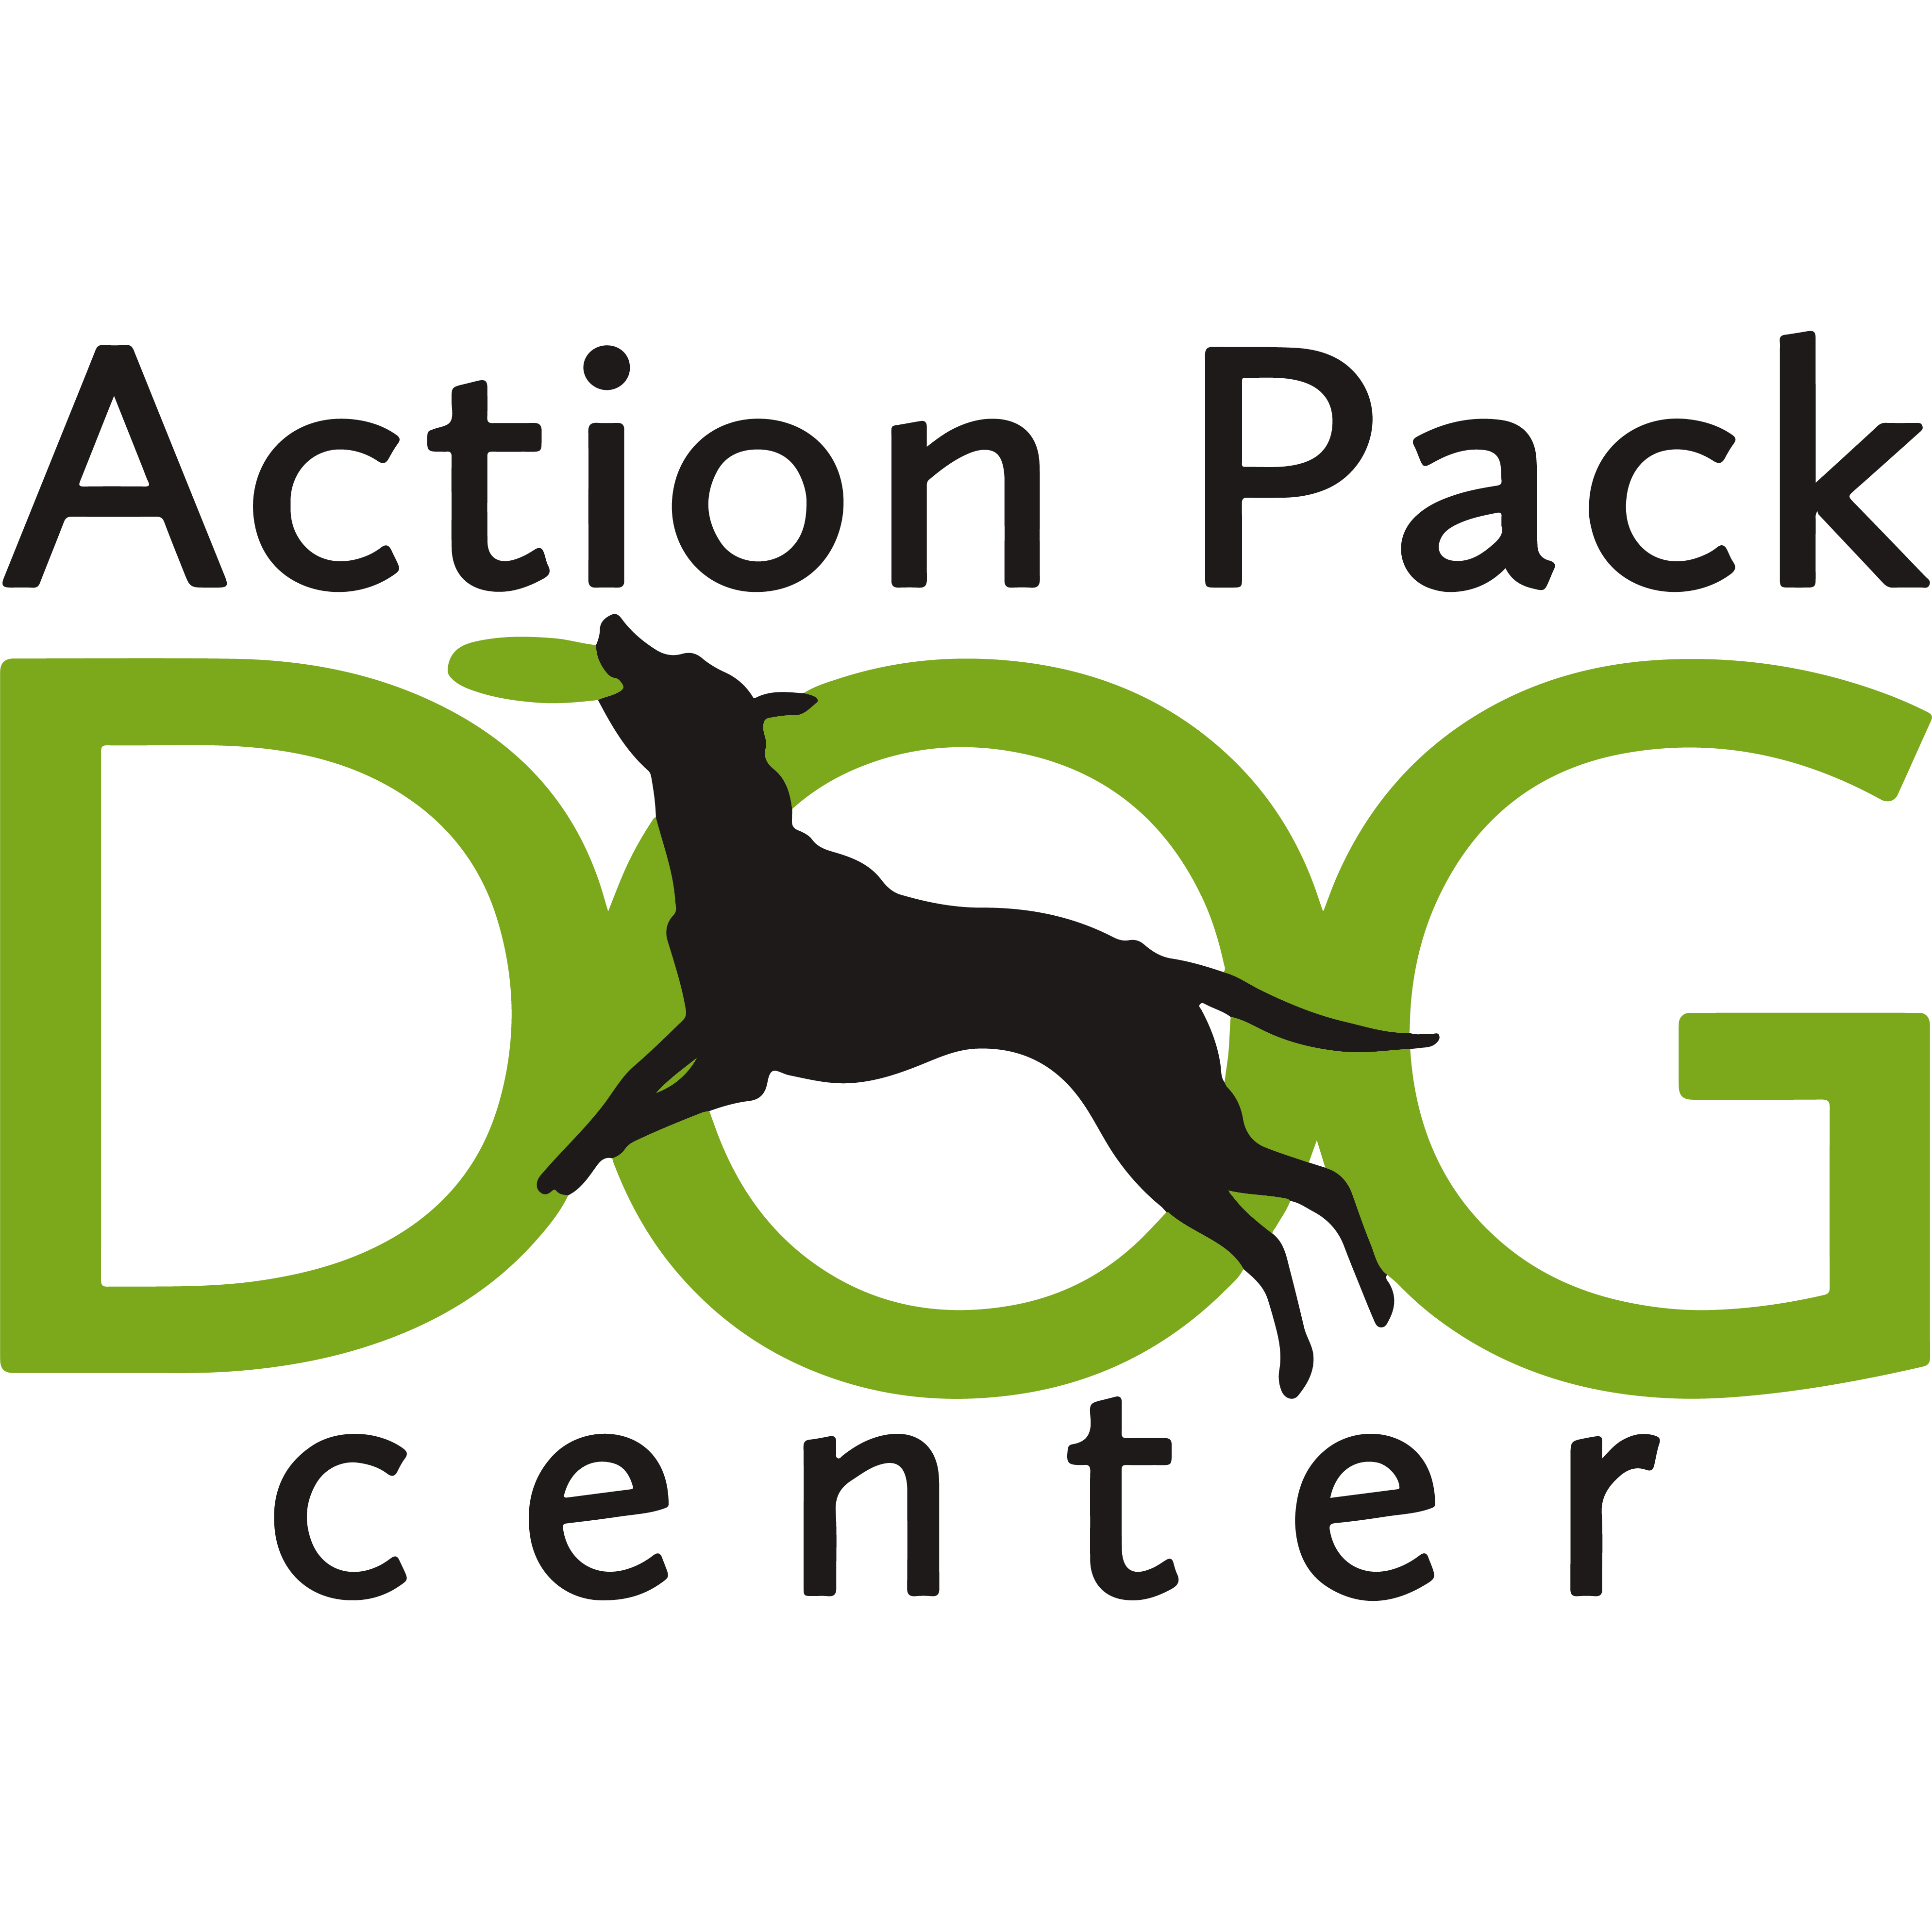 Action Pack - Georgetown